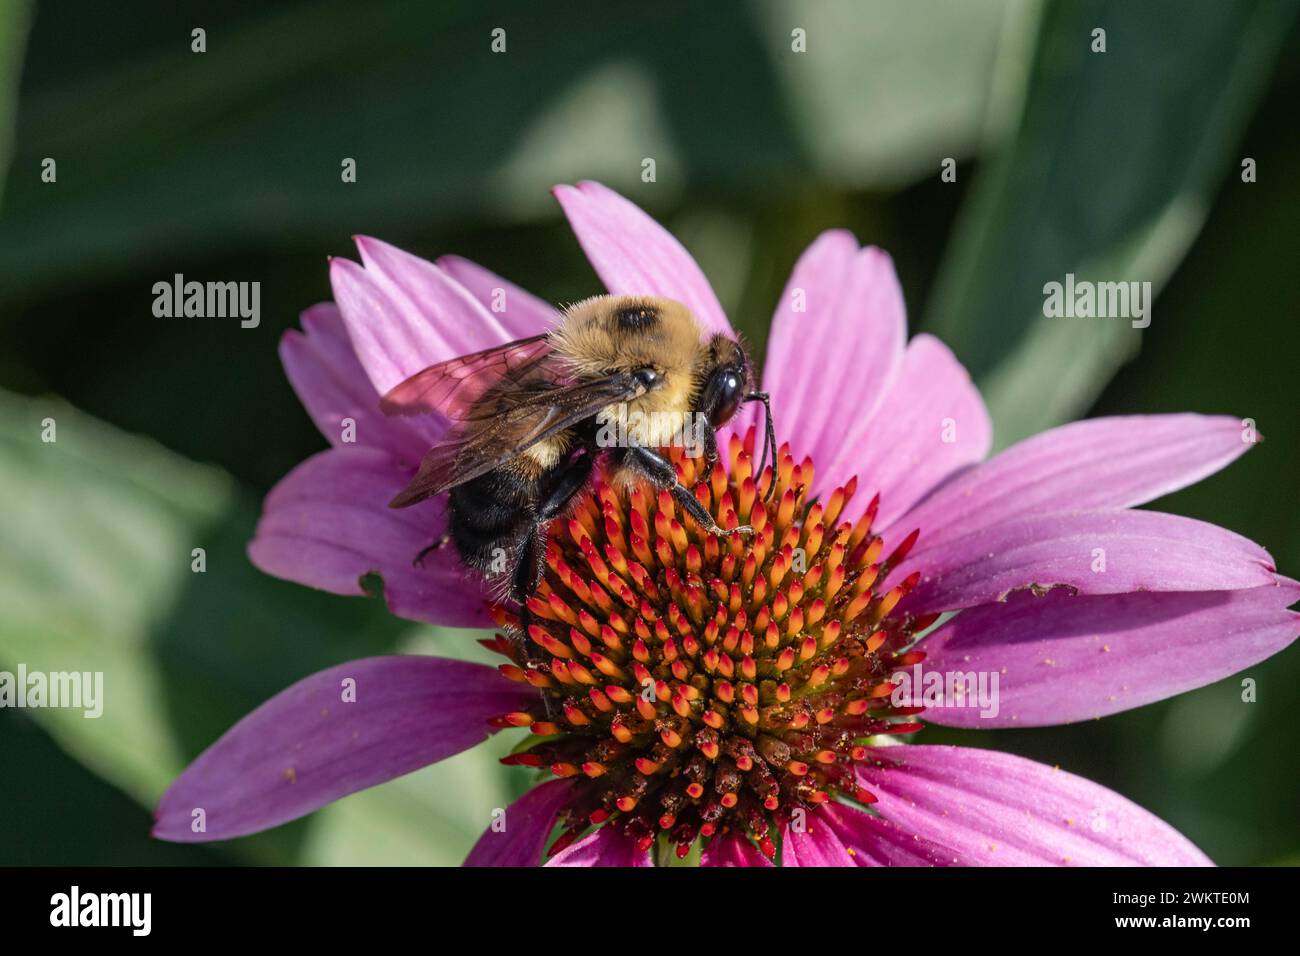 Bee perched on flower sipping nectar Stock Photo